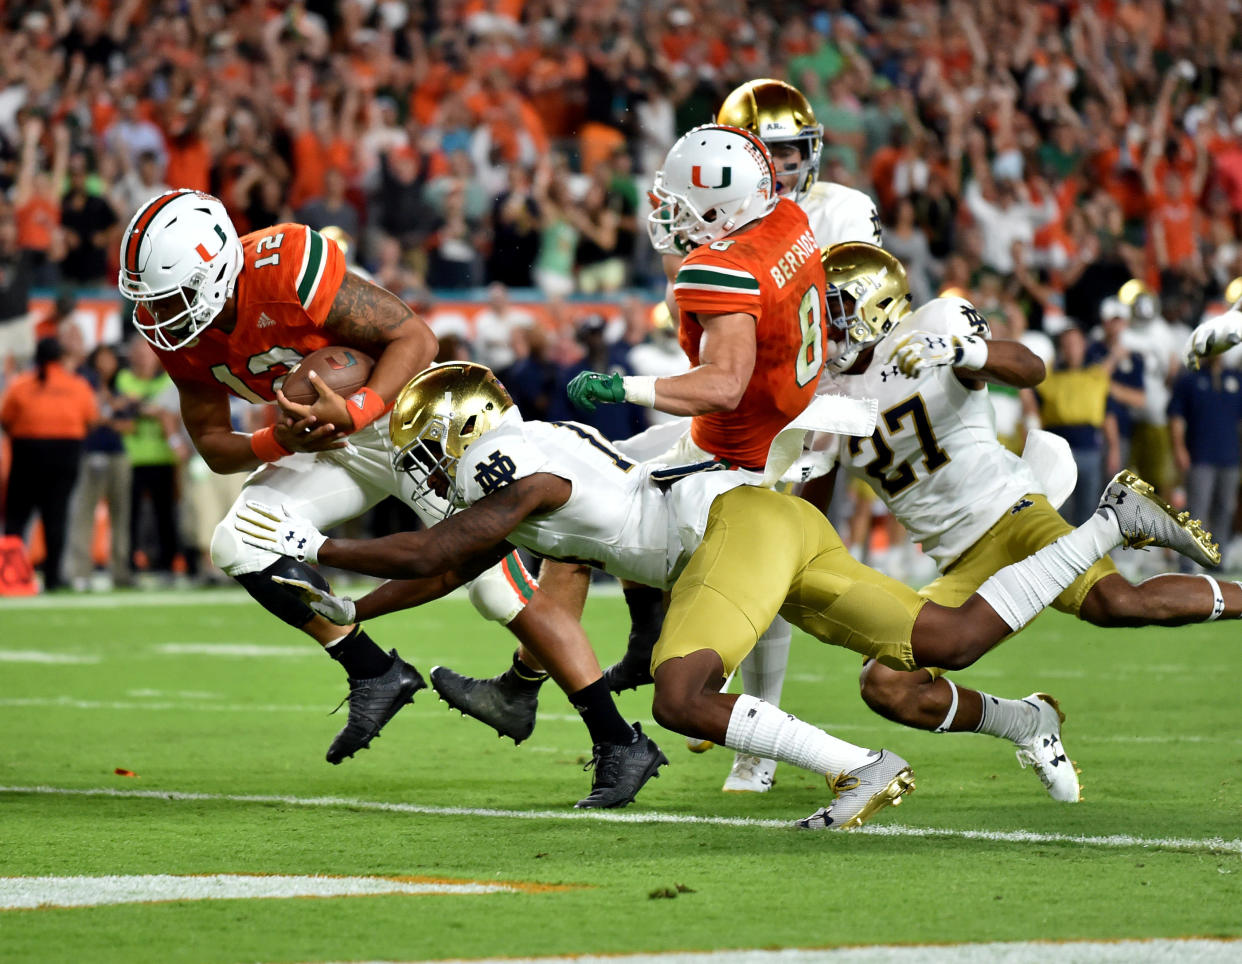 Nov 11, 2017; Miami Gardens, FL, USA; Miami Hurricanes quarterback Malik Rosier (12) scores a touchdown as Notre Dame Fighting Irish safety Devin Studstill (14) defends during the first half at Hard Rock Stadium. Mandatory Credit: Steve Mitchell-USA TODAY Sports TPX IMAGES OF THE DAY